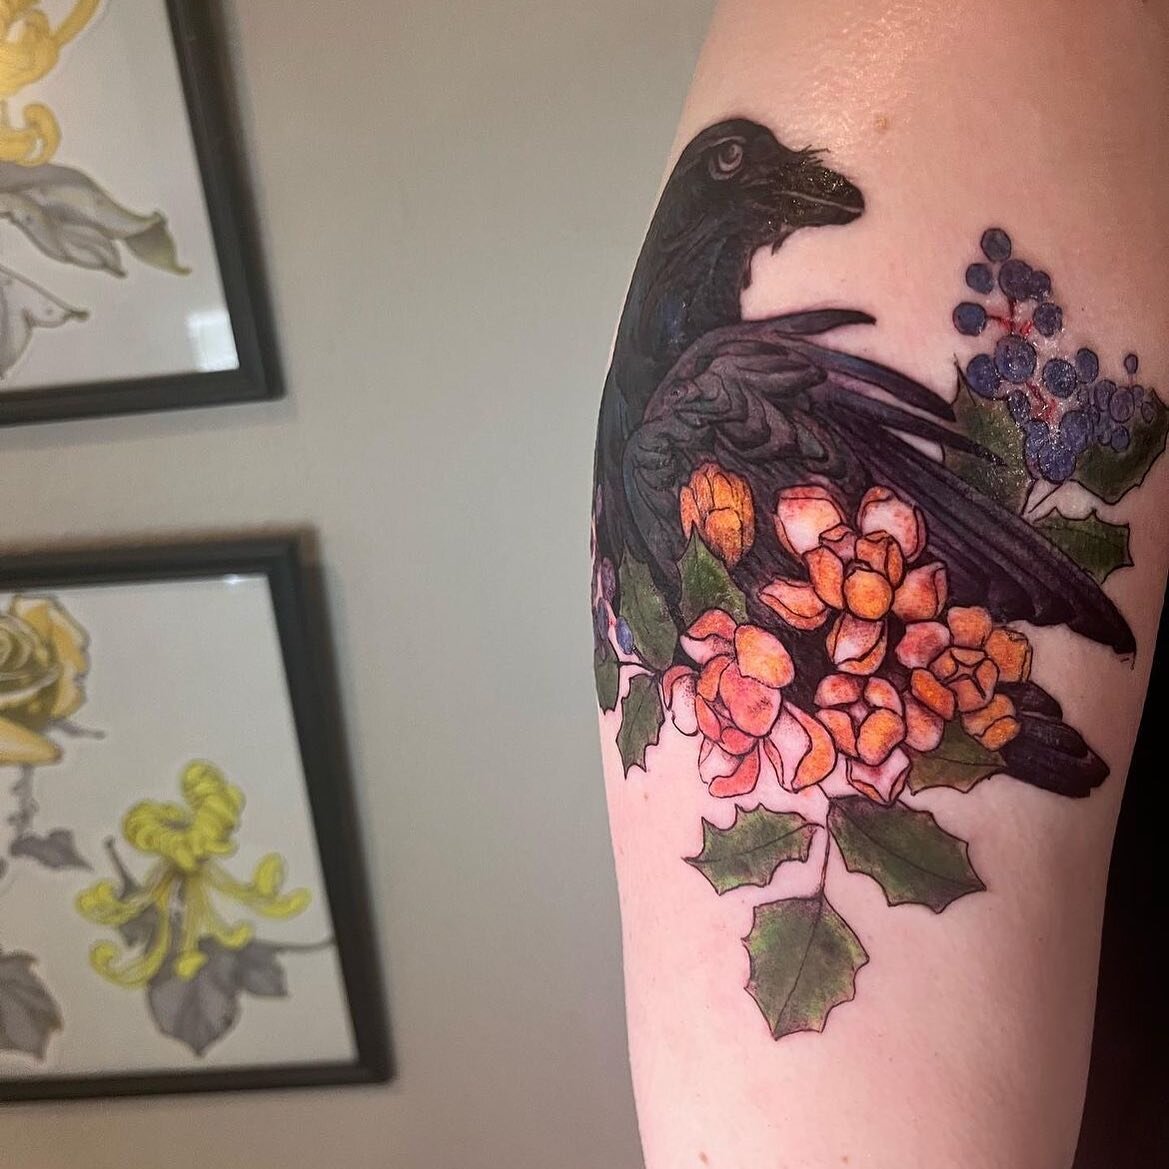 An Oregon tribute tattoo, a crow
and our State Flower. For Carly by Amelia @___grandmashands 

#oregontattoo #pdxtattoo #crowtattoo #stateflower #flowertattoo #bipoctattooartist #portlandoregon